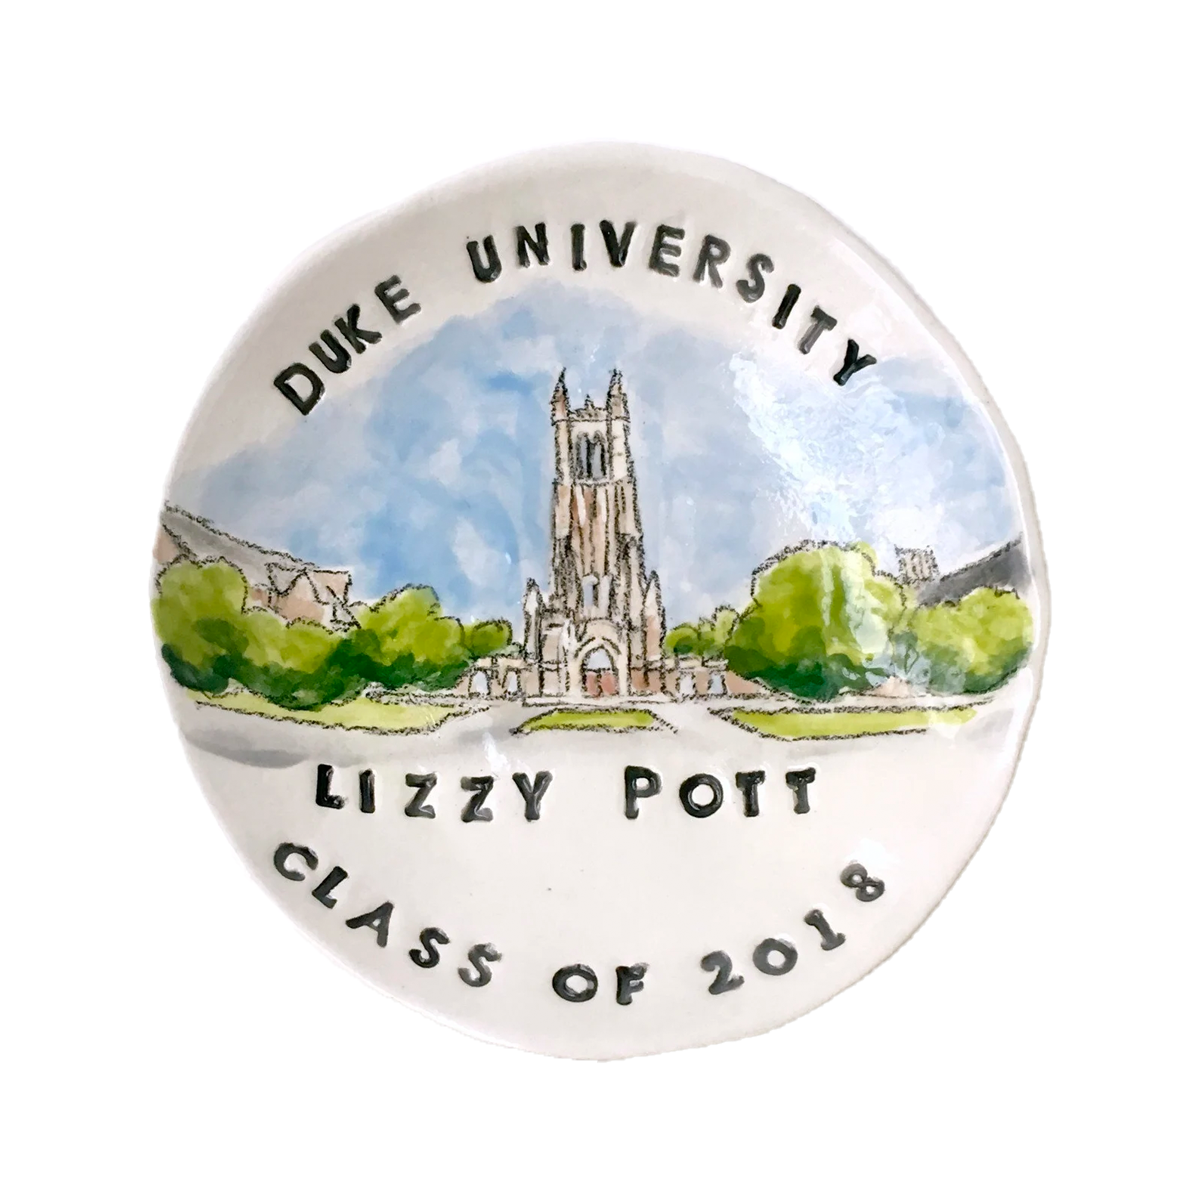 This <a href="https://www.glamour.com/gallery/best-personalized-gifts?mbid=synd_msn_rss&utm_source=msn&utm_medium=syndication">personalized gift</a> comes stamped with your grad’s name, alma mater, and graduation year, all centered around a portrait of their campus. No promises, but we suspect they’ll cherish this dish for decades to come. $58, Etsy. <a href="https://www.etsy.com/listing/511759233/college-graduation-gift-for-her-keepsake">Get it now!</a><p>Sign up for today’s biggest stories, from pop culture to politics.</p><a href="https://www.glamour.com/newsletter/news?sourceCode=msnsend">Sign Up</a>